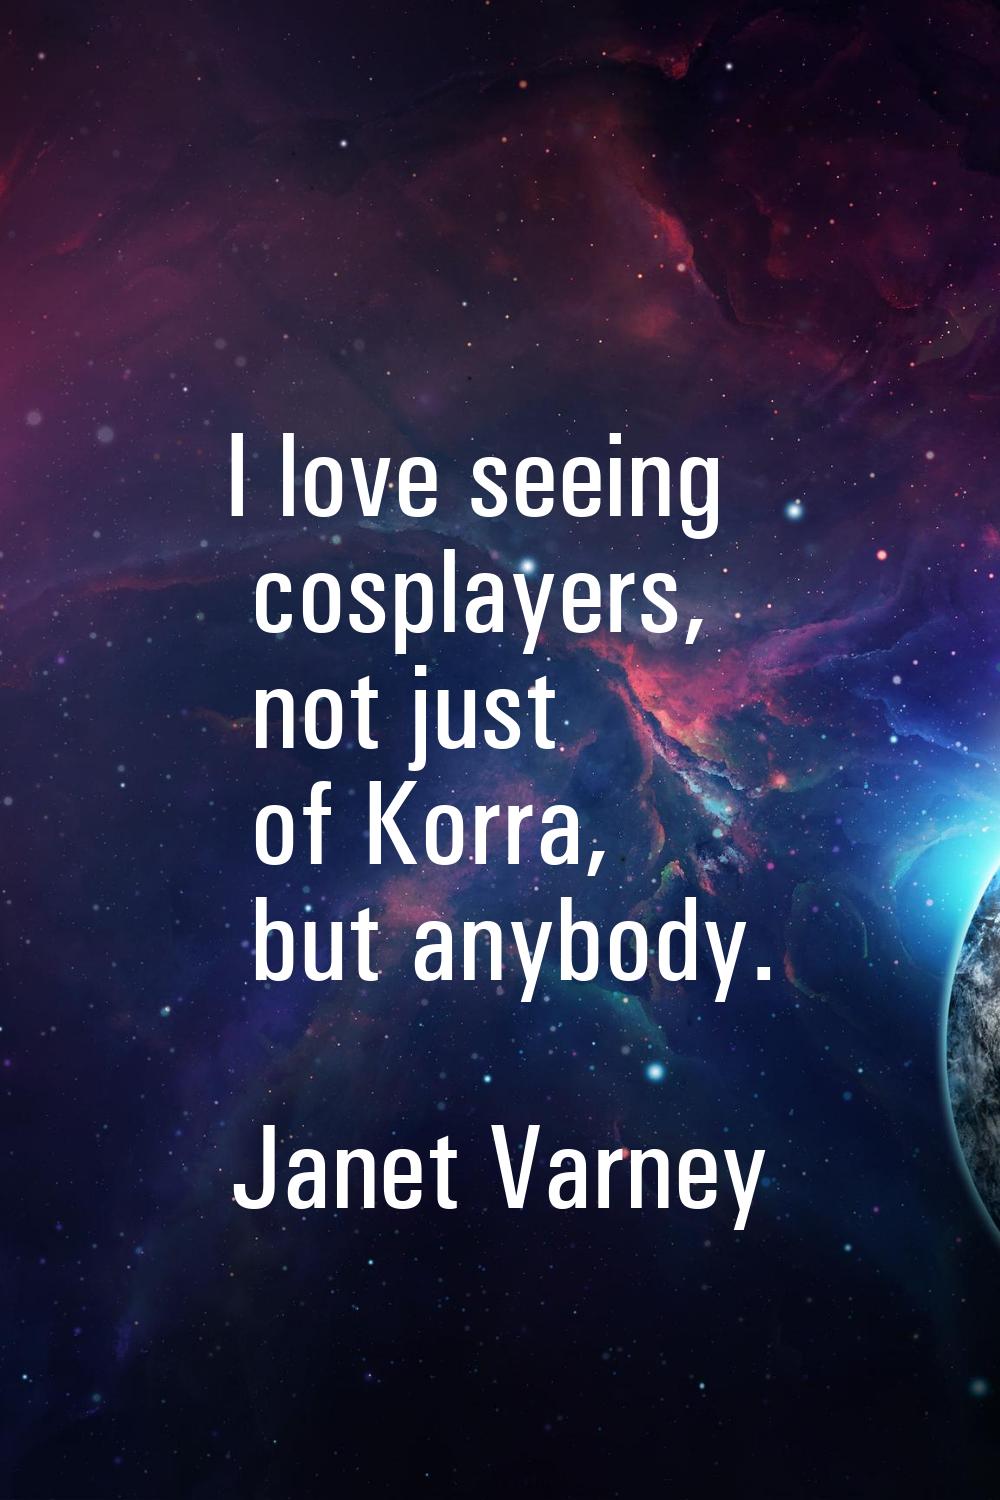 I love seeing cosplayers, not just of Korra, but anybody.